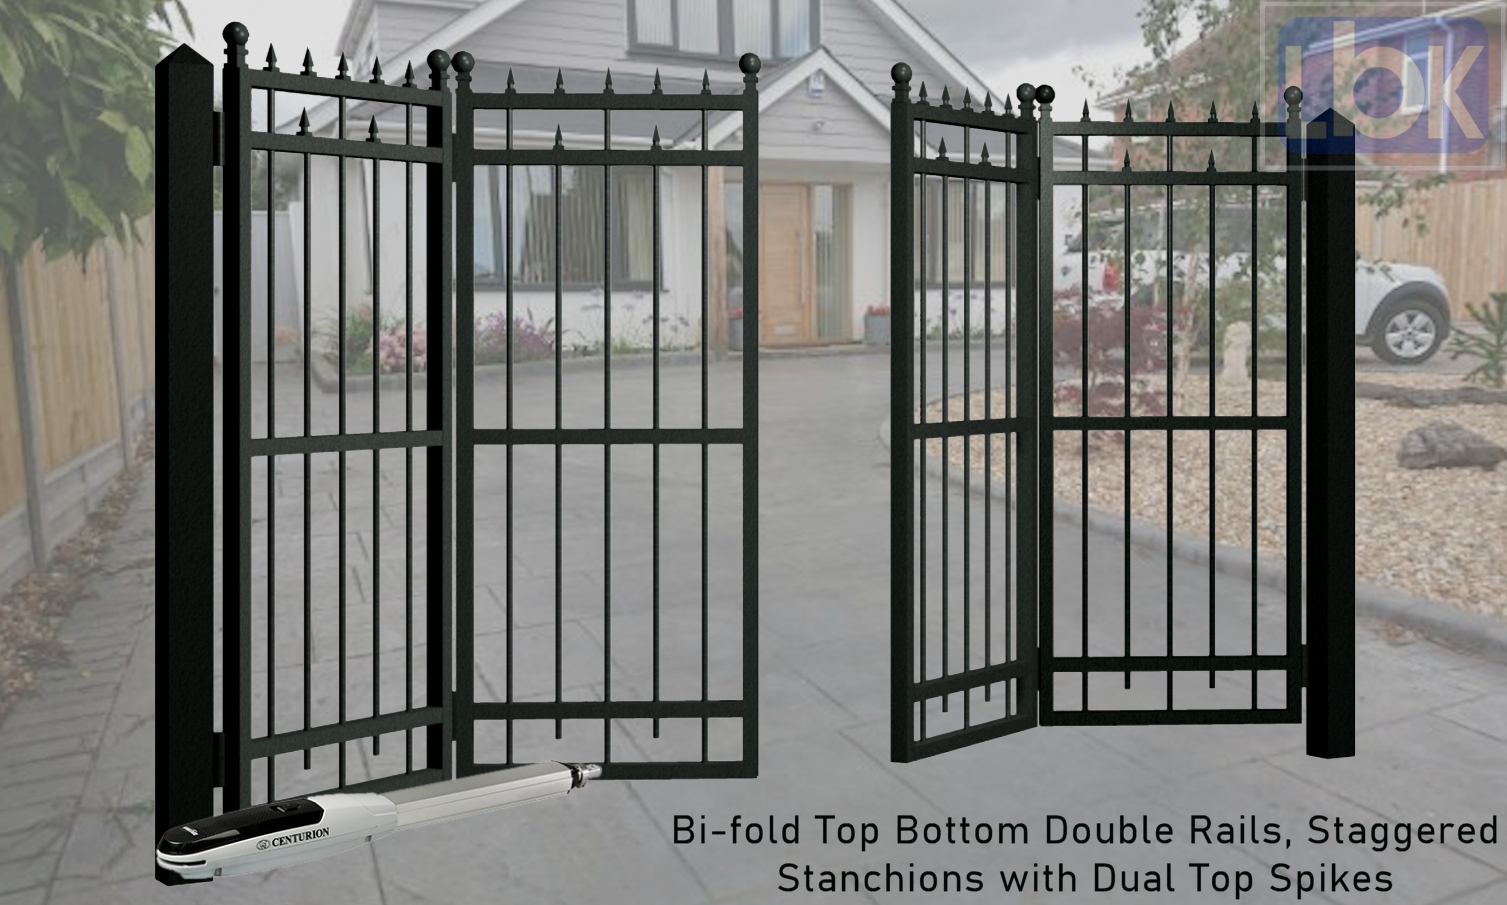 04a Bi-fold Top Bottom Double Rails, Staggered Stanchions Gate with Dual Top Spikes